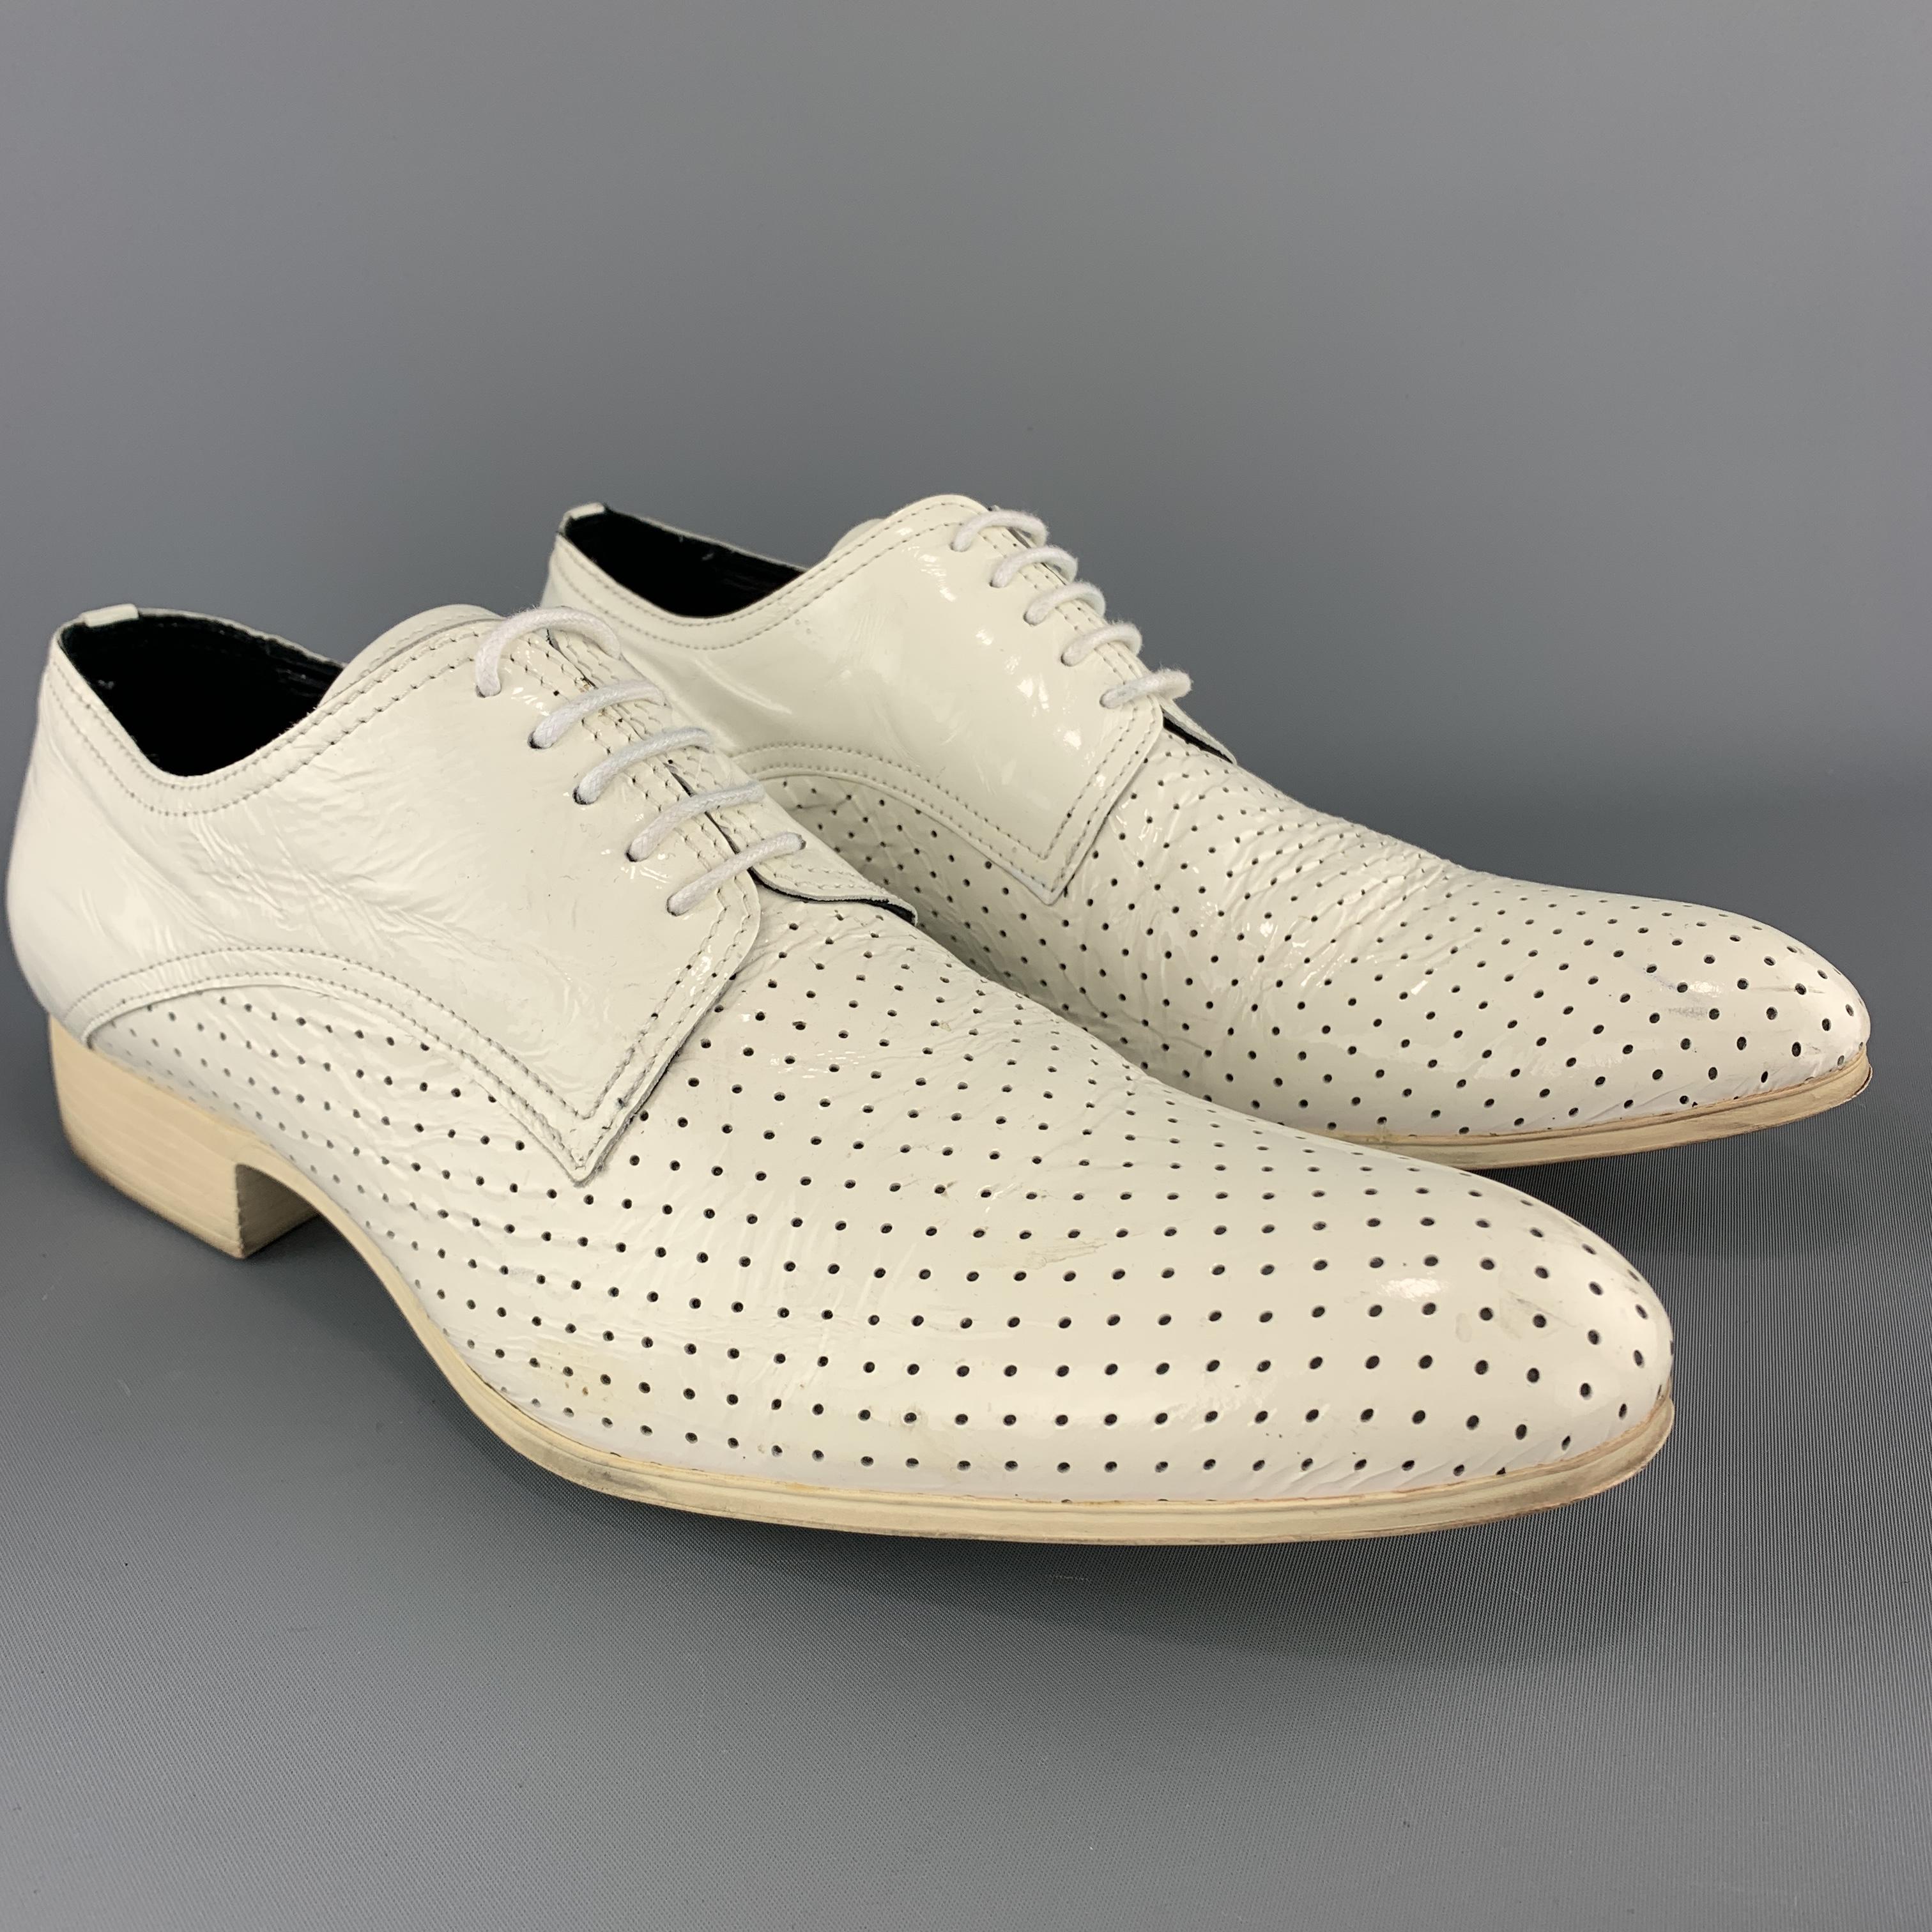 N.D.C. dress shoes come in cream perforated patent leather with a pointed toe and rubber sole. Wear throughout. As-is. Made in Europe.

Fair Pre-Owned Condition.
Marked: EU 43

Outsole: 12.5 x 4 in.